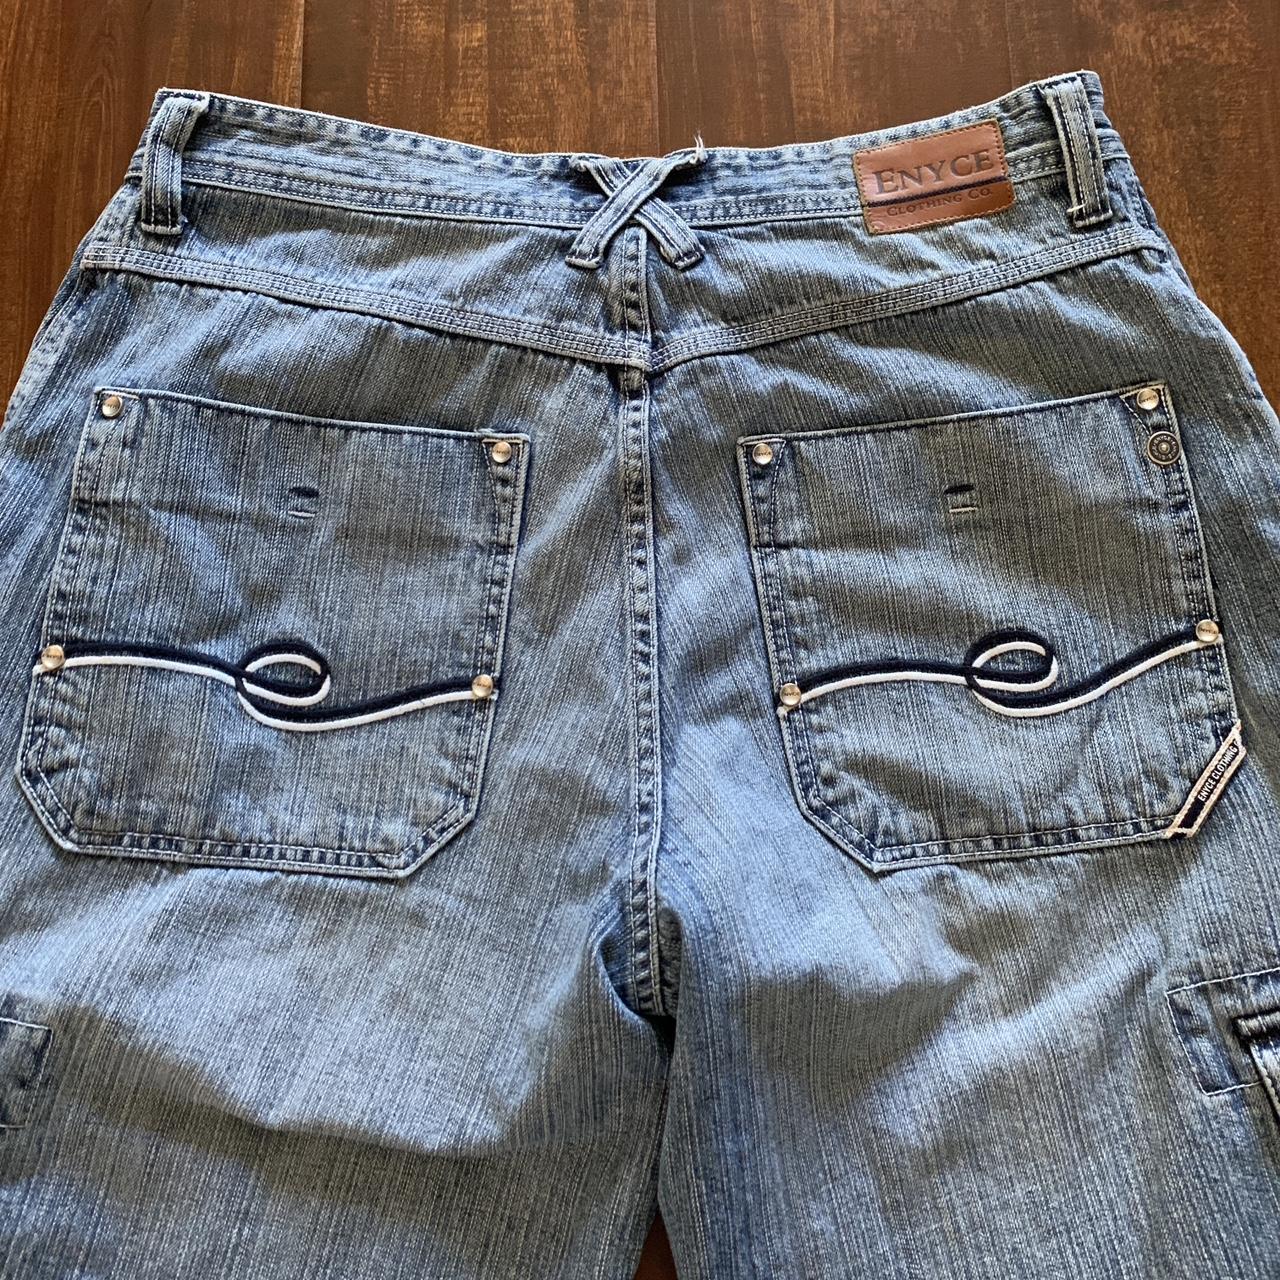 Enyce baggy jorts Size 34 15’ inseam for a super... - Depop